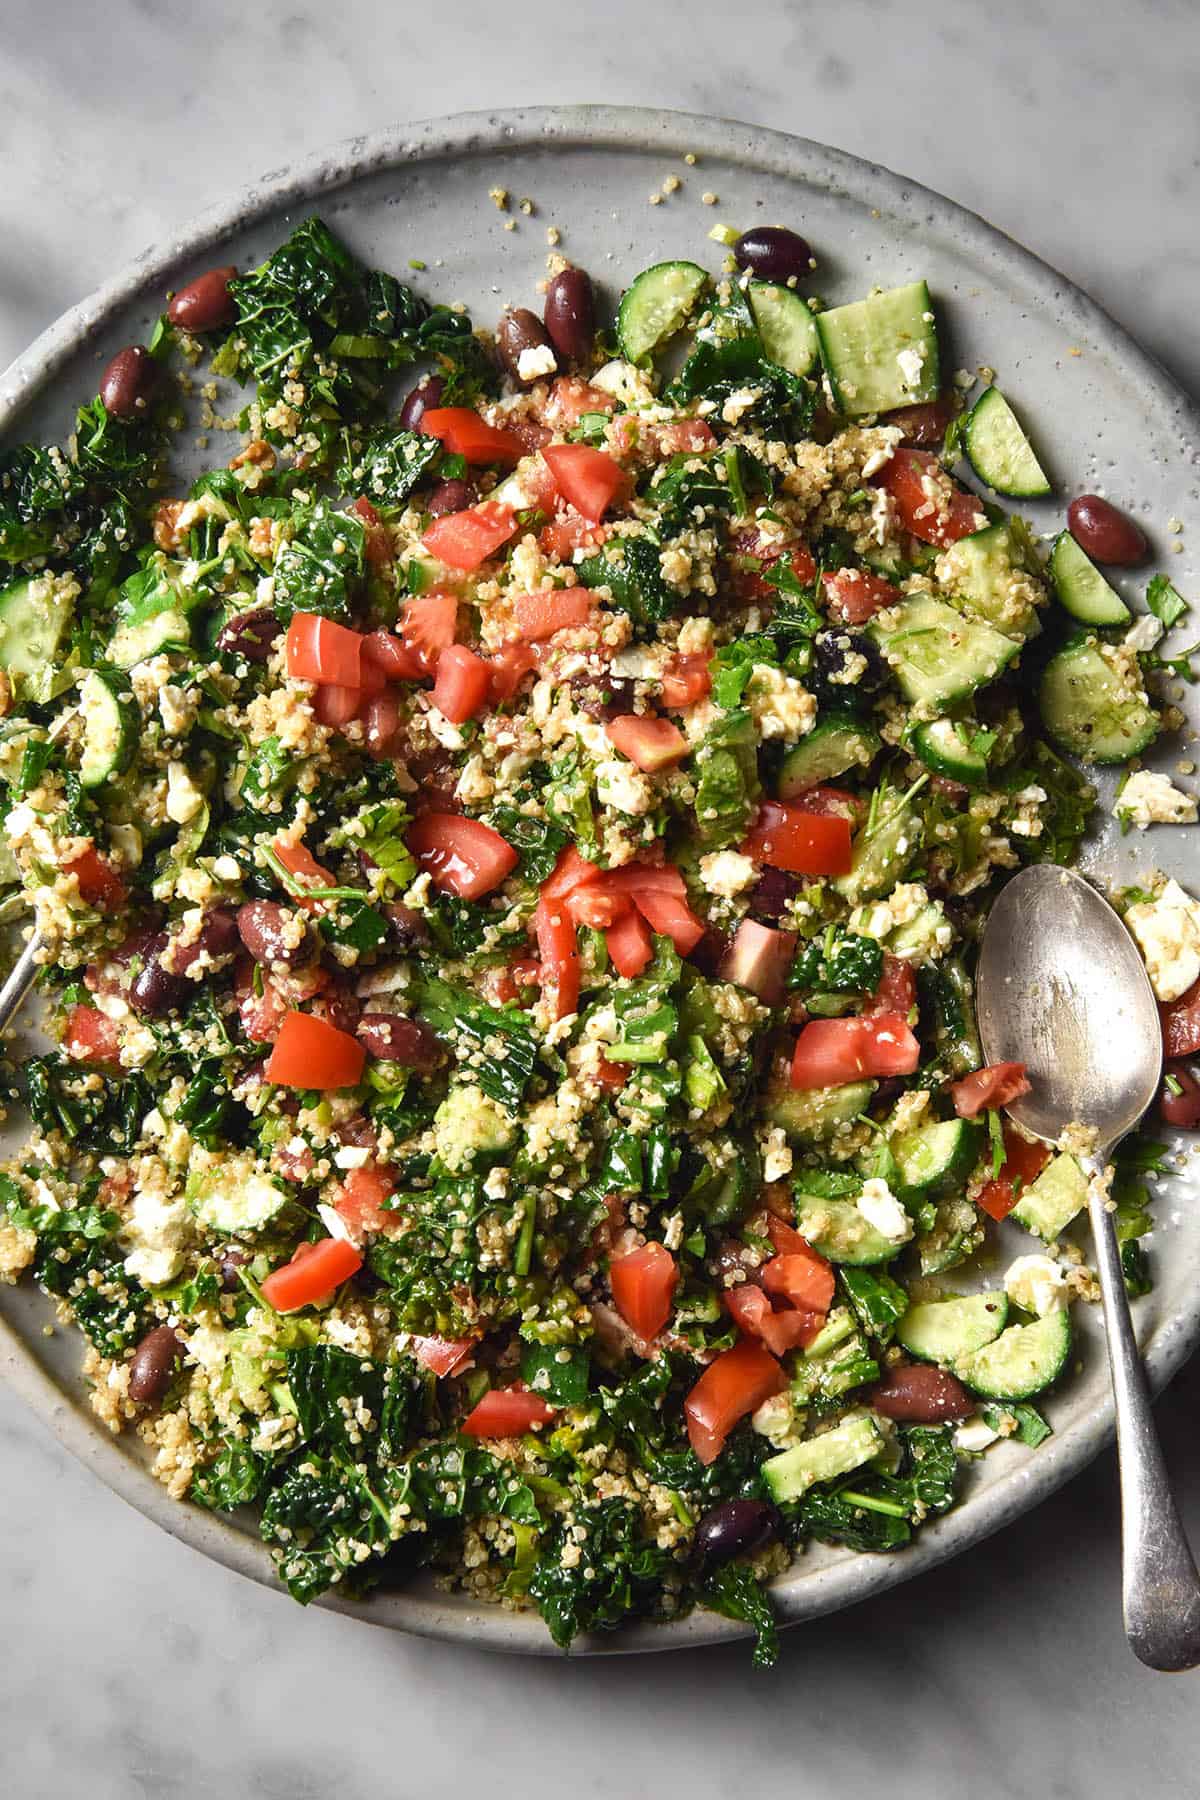 An aerial image of a cucumber, tomato, feta and walnut salad with oregano lemon quinoa. The salad sits in a white ceramic bowl atop a white marble table.